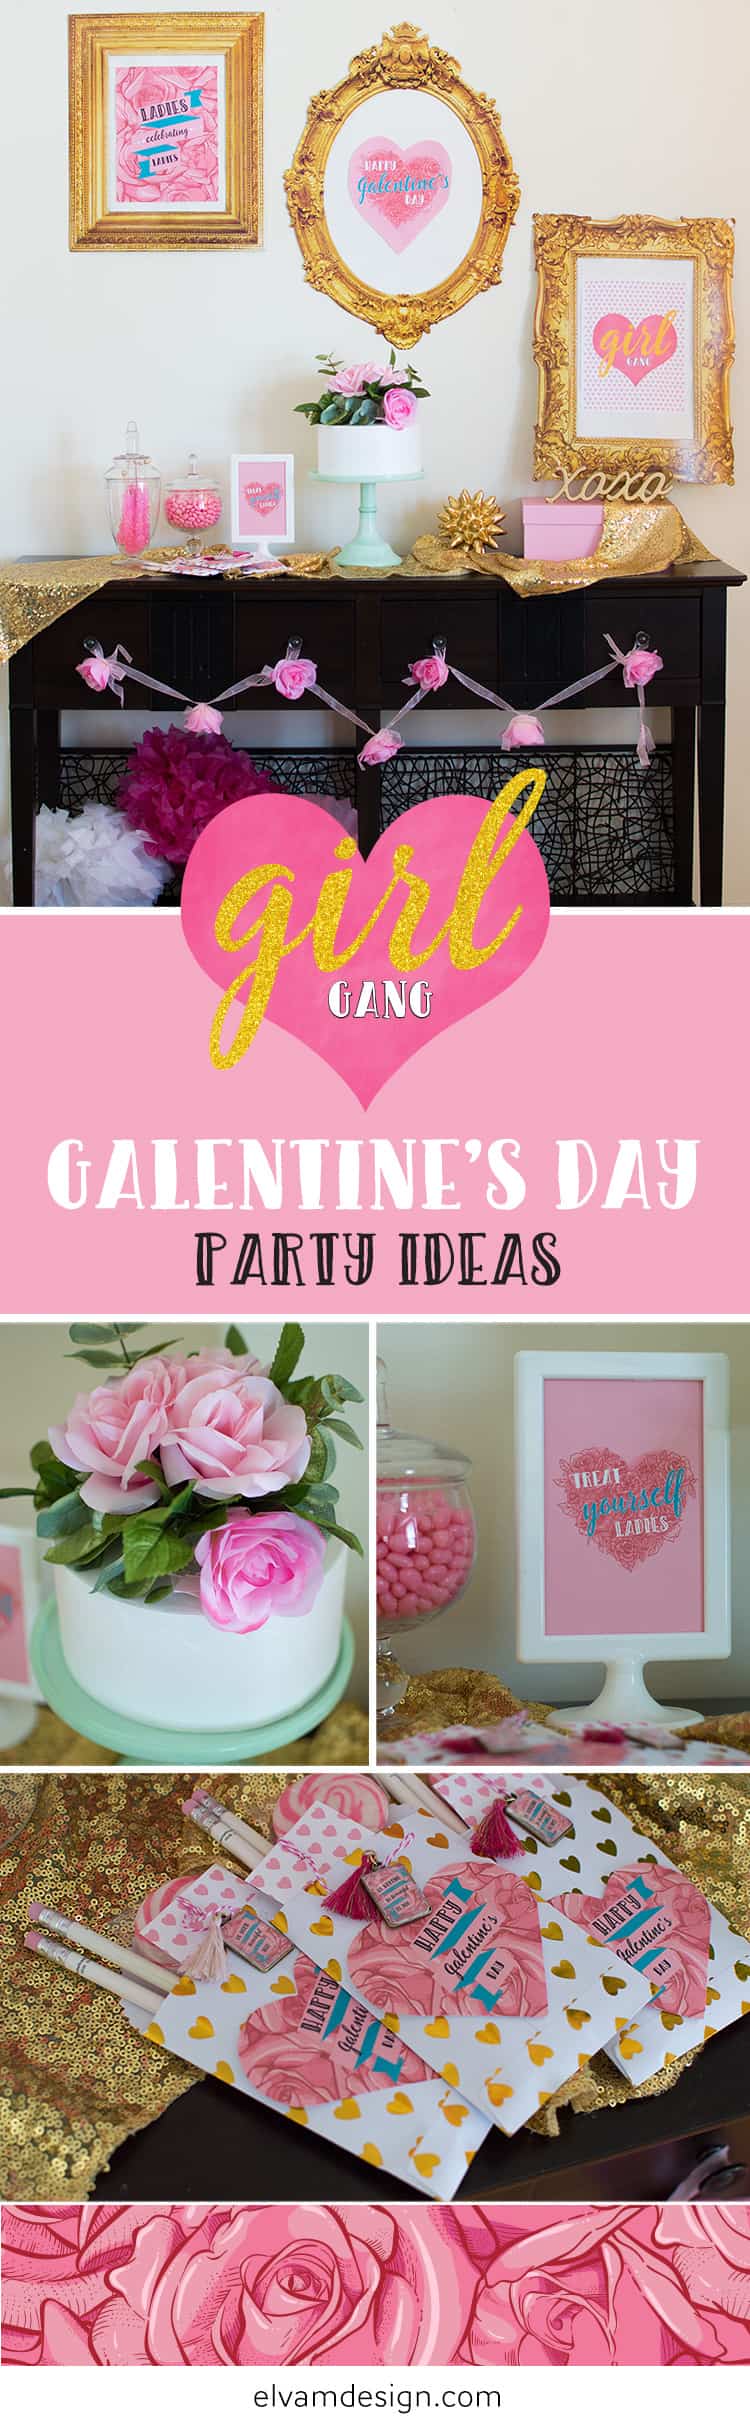 Girl Gang Galentine's Day Party